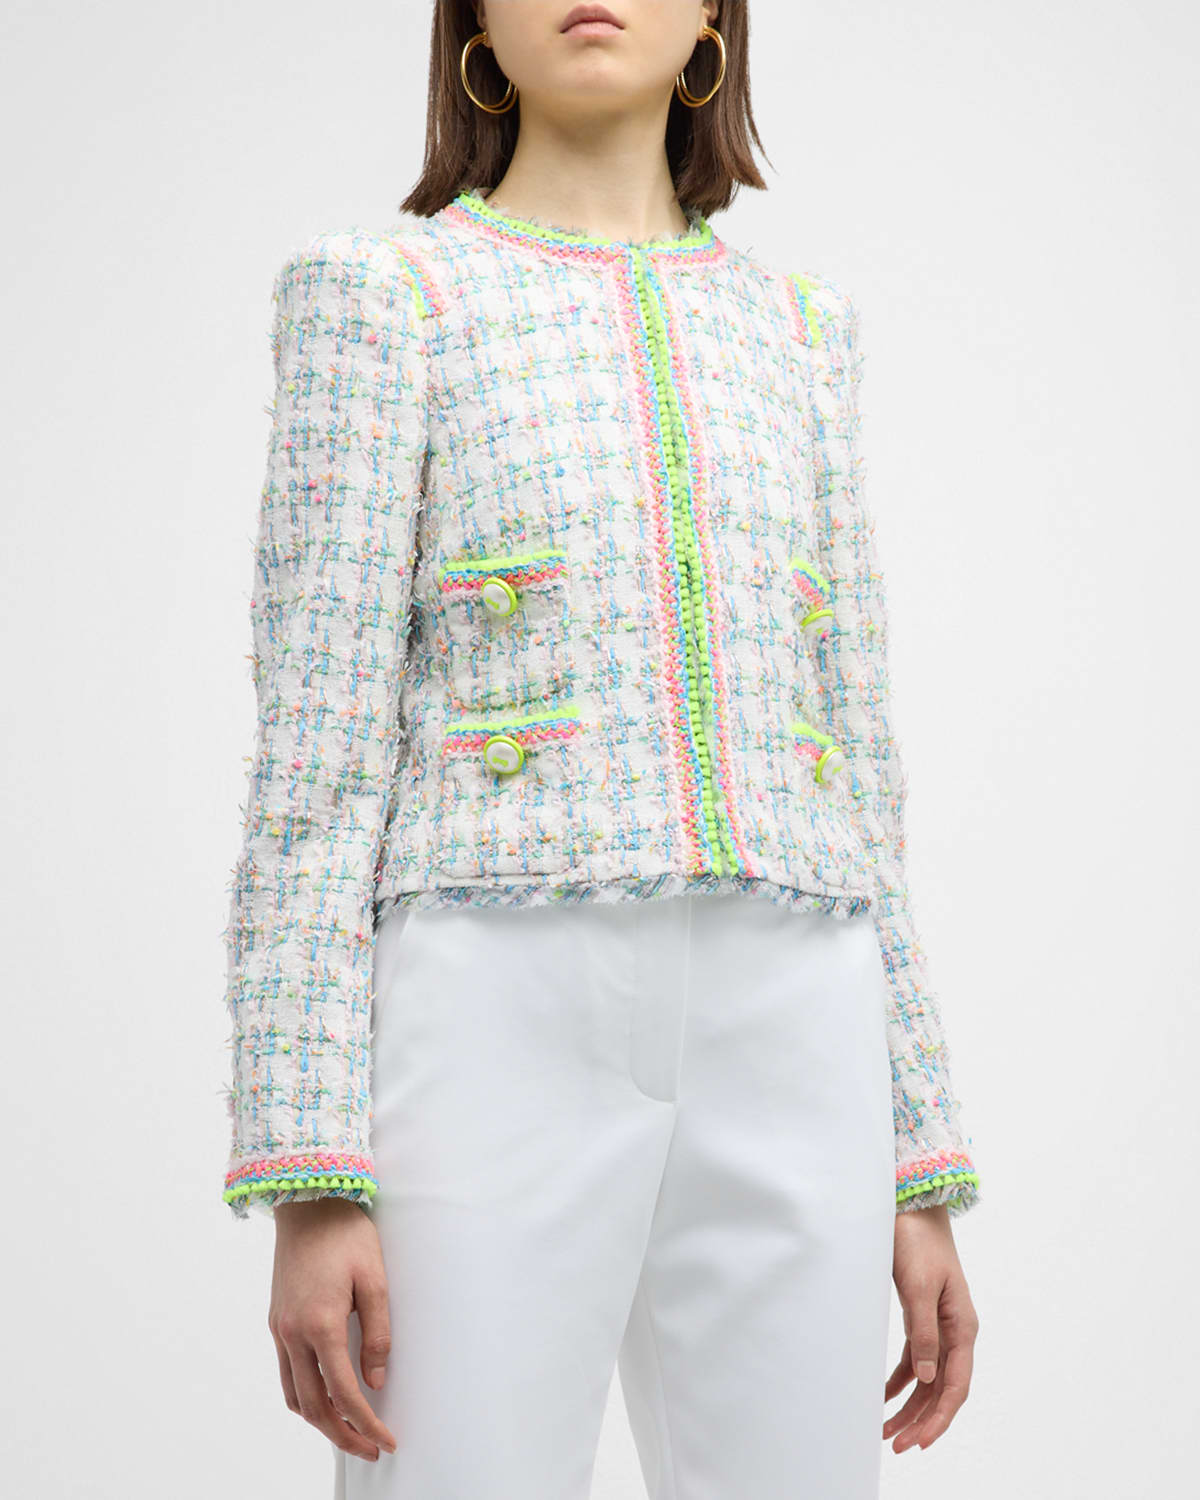 Maison Common Cotton-blend Tweed Jacket With Neon Rick Rack Trim In Open White